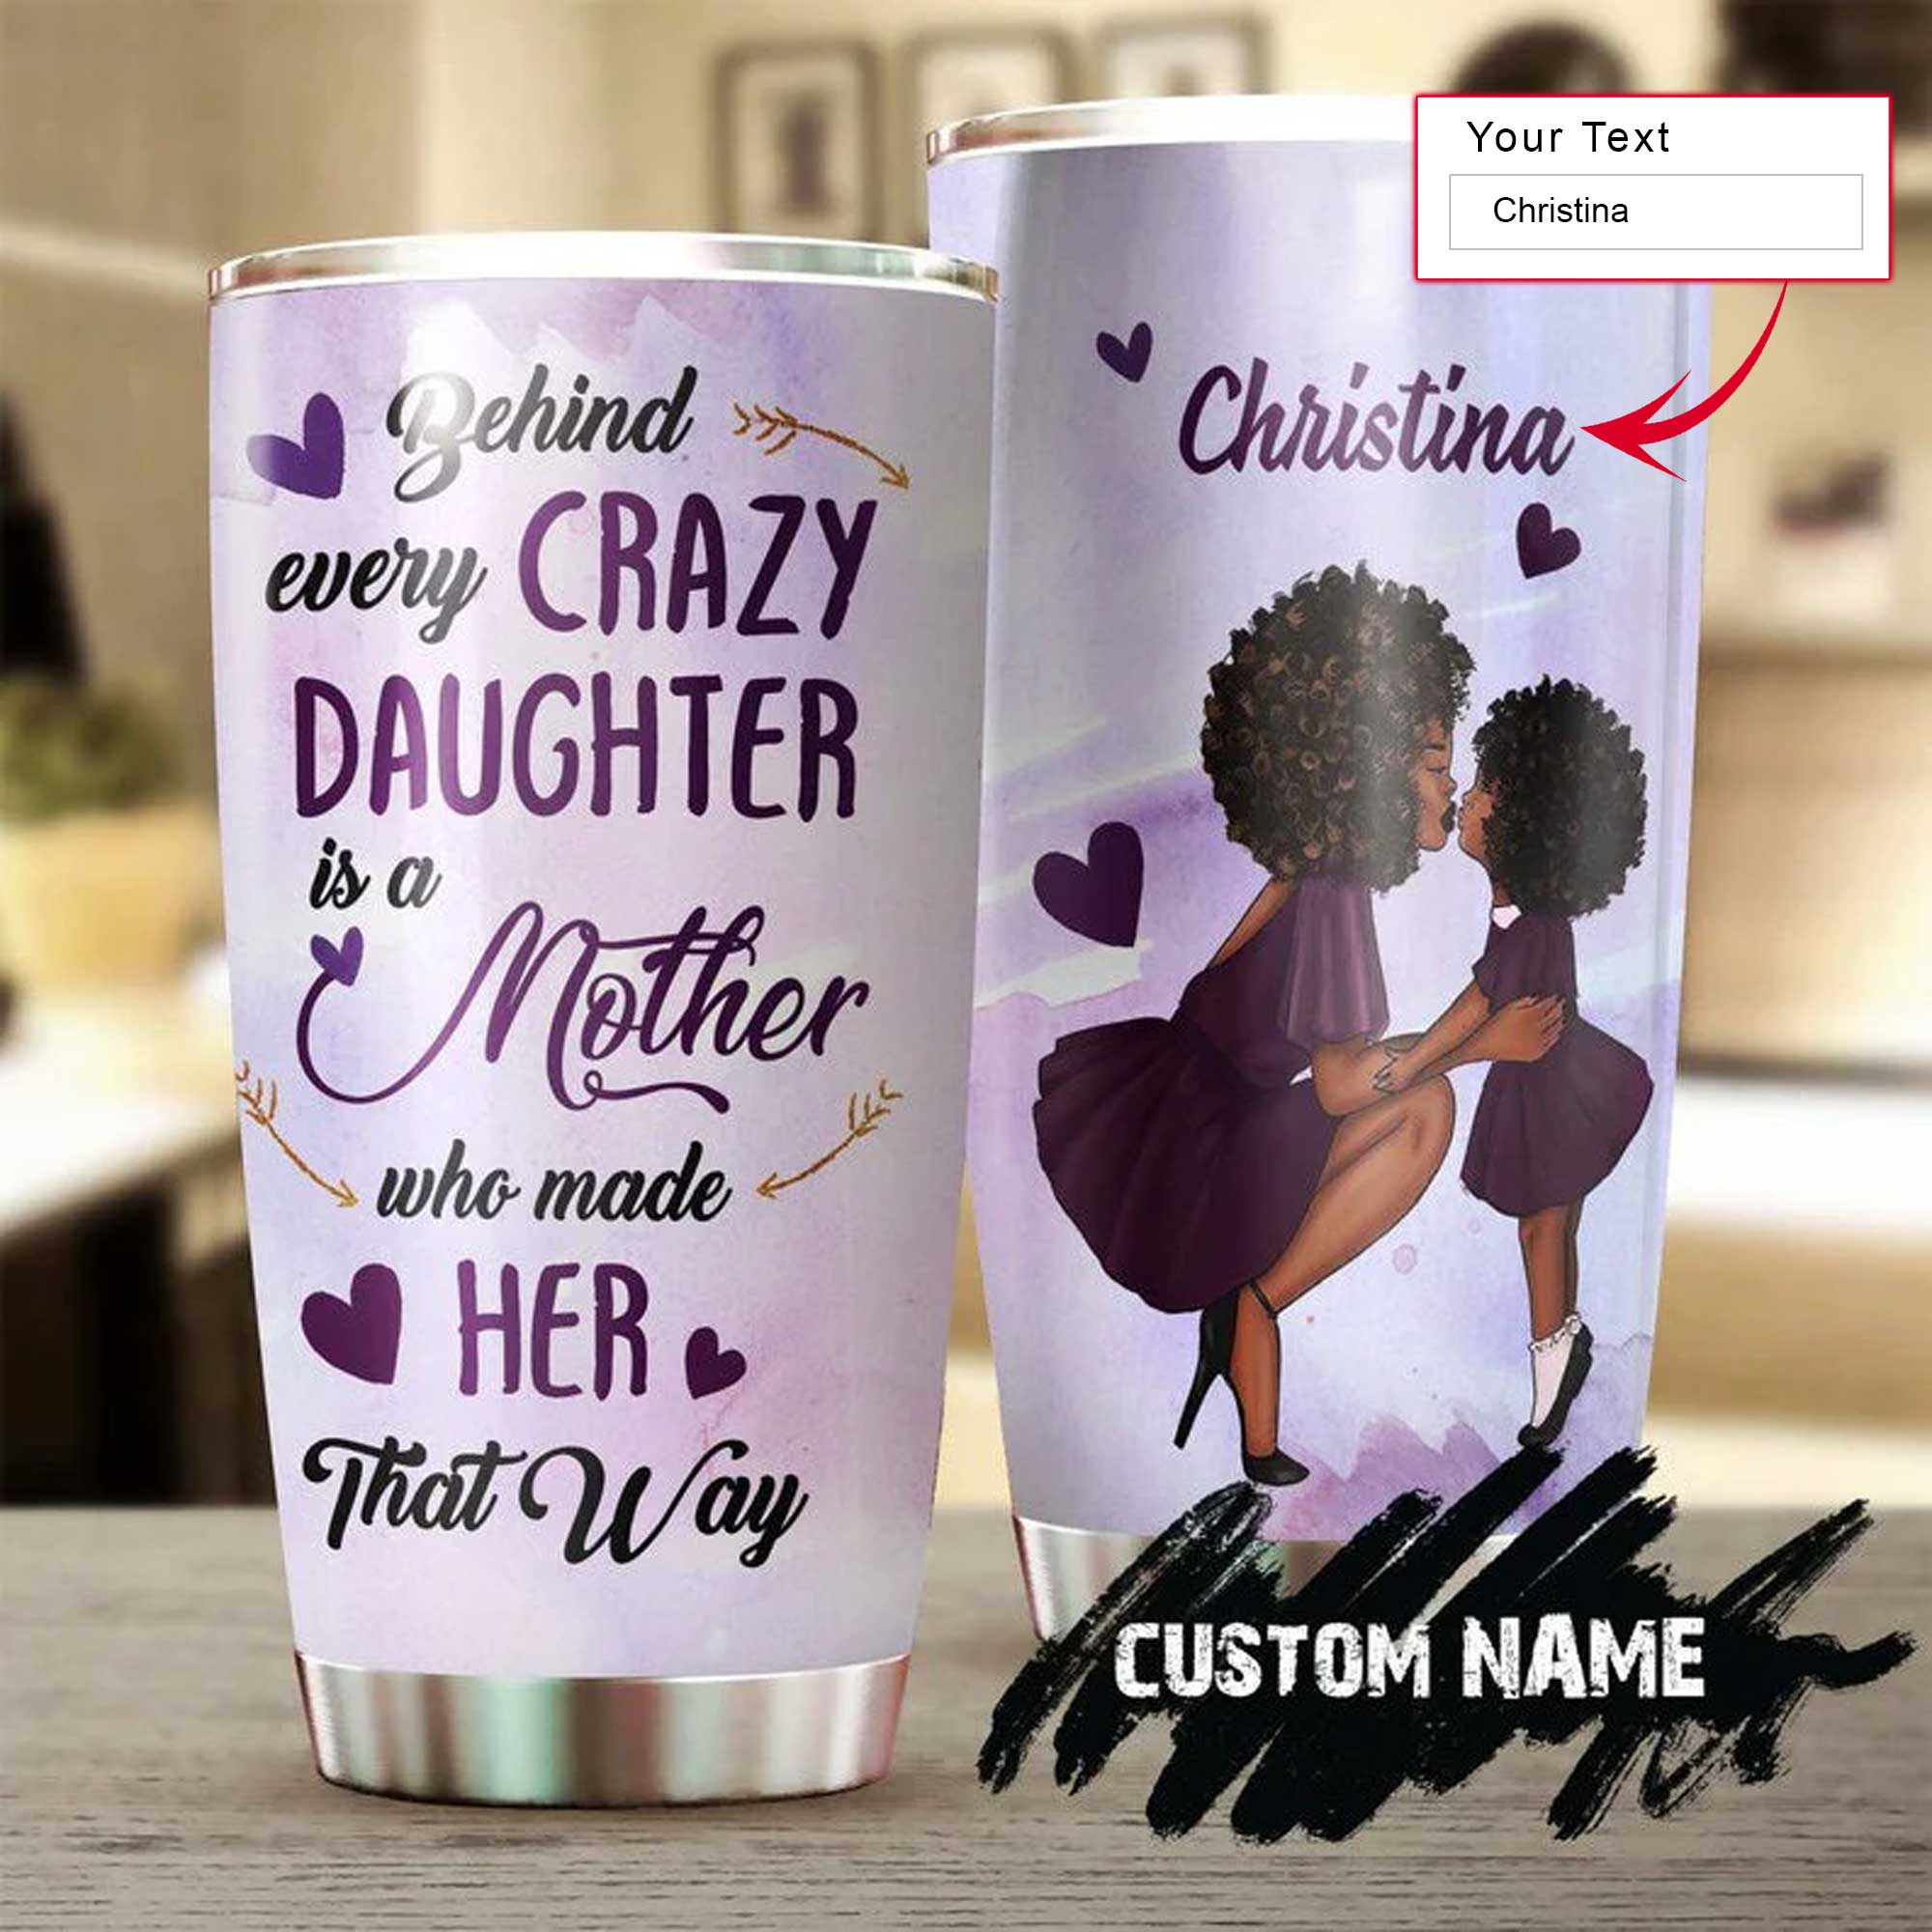 Personalized Mother's Day Gift Tumbler - Custom Gift For Mother's Day, Presents for Mom - Behind A Crazy Daughter Is A Mom, Black Mom Tumbler